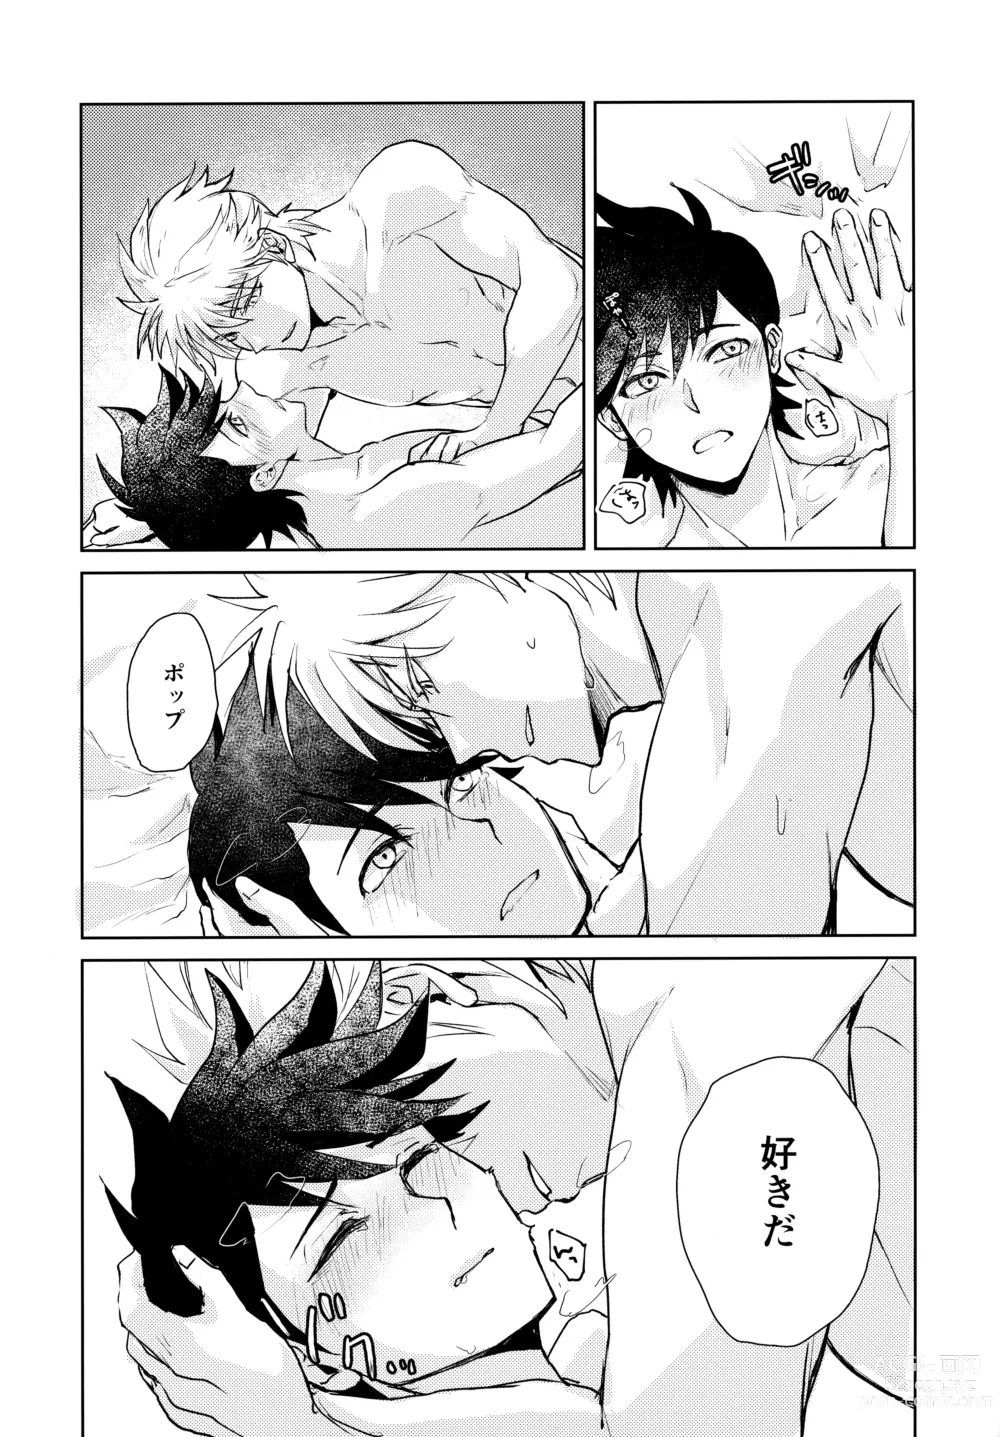 Page 19 of doujinshi You Complete Me!